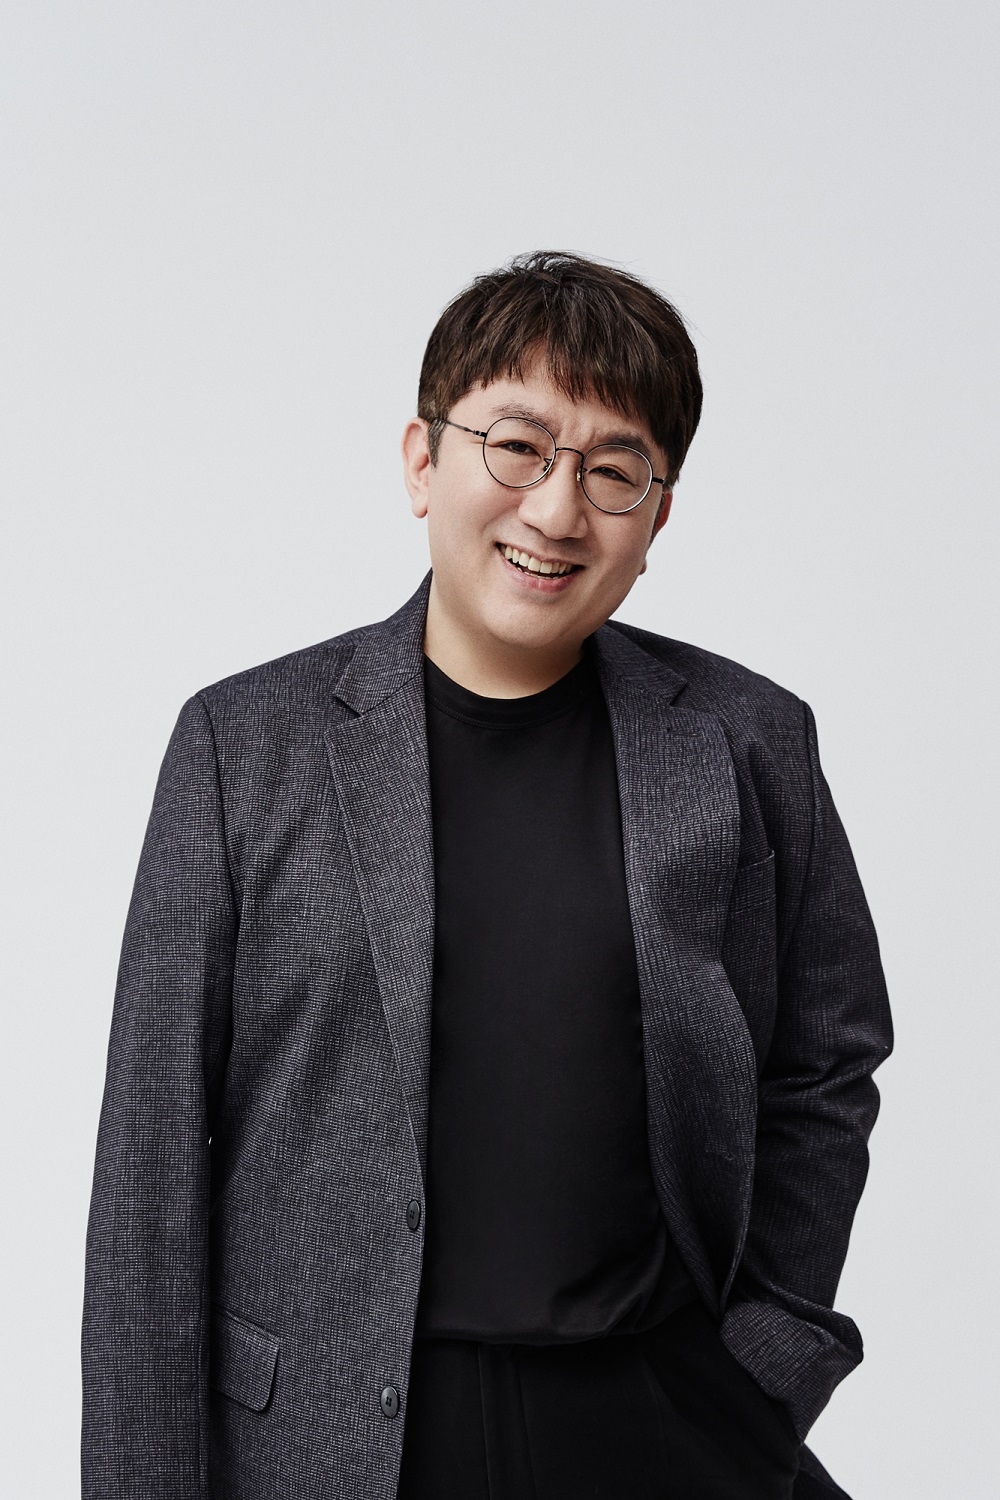 Bang Si-Hyuk, CEO of Big Hit Entertainment, was named New Power Generation.On the 7th (local time), Billboard, a media specializing in United States of America music, published the Meet Musics New Power Generation: 25 Top Innovators, the next generation leader leading the World music market, and published an article on Bang Si-Hyuks representative.Billboard said, BTS, formed by composer and producer Bang Si-Hyuk, has emerged in Western popular music in 2018. FAKE LOVE ranked 10th on the first Billboard Hot 100 and ranked 111st in Social 50.Billboard also said that BTS was the first Korean artist to have two albums on the Billboard 200, and sold out the first stadium show at United States of America in an hour.We have not set up a special strategy to make it a world pop group, said Bang Si-Hyuk, CEO of Billboard. We work horizontally with BTS.I promised the members that their music should come from their inner story.Bang Si-Hyuk was selected as the International Power Players by Billboard in May last year and was introduced as a leader in moving the former World music market.iMBC Park Han-byeol  Photos